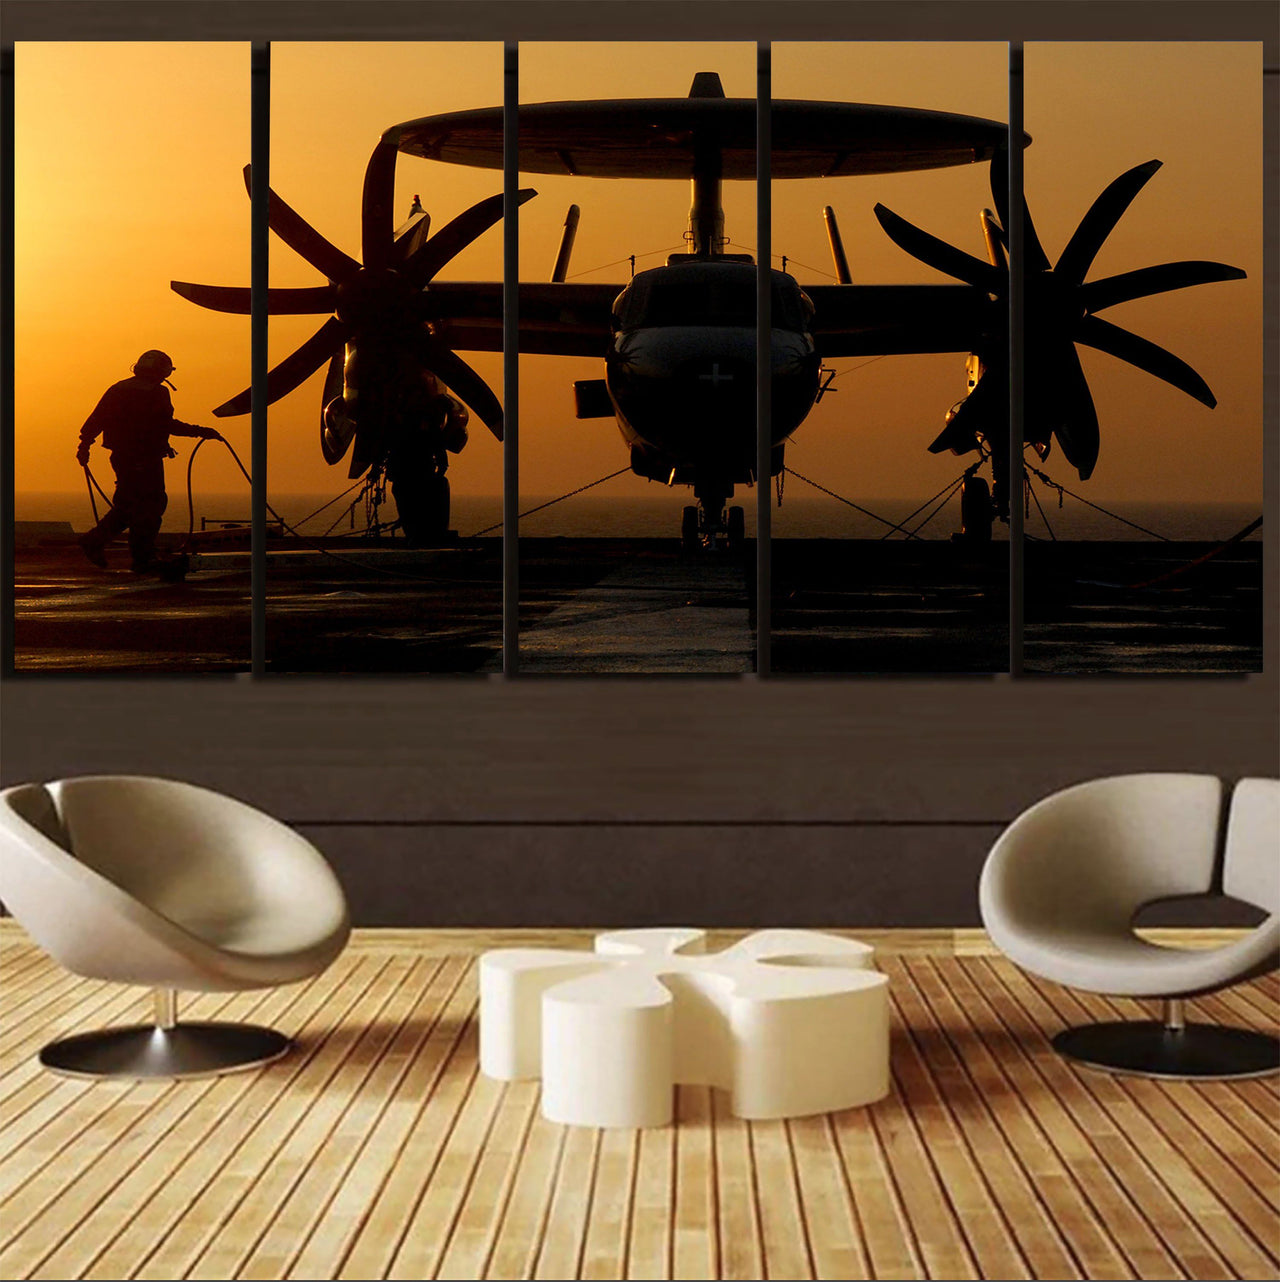 Military Plane at Sunset Printed Canvas Prints (5 Pieces) Aviation Shop 